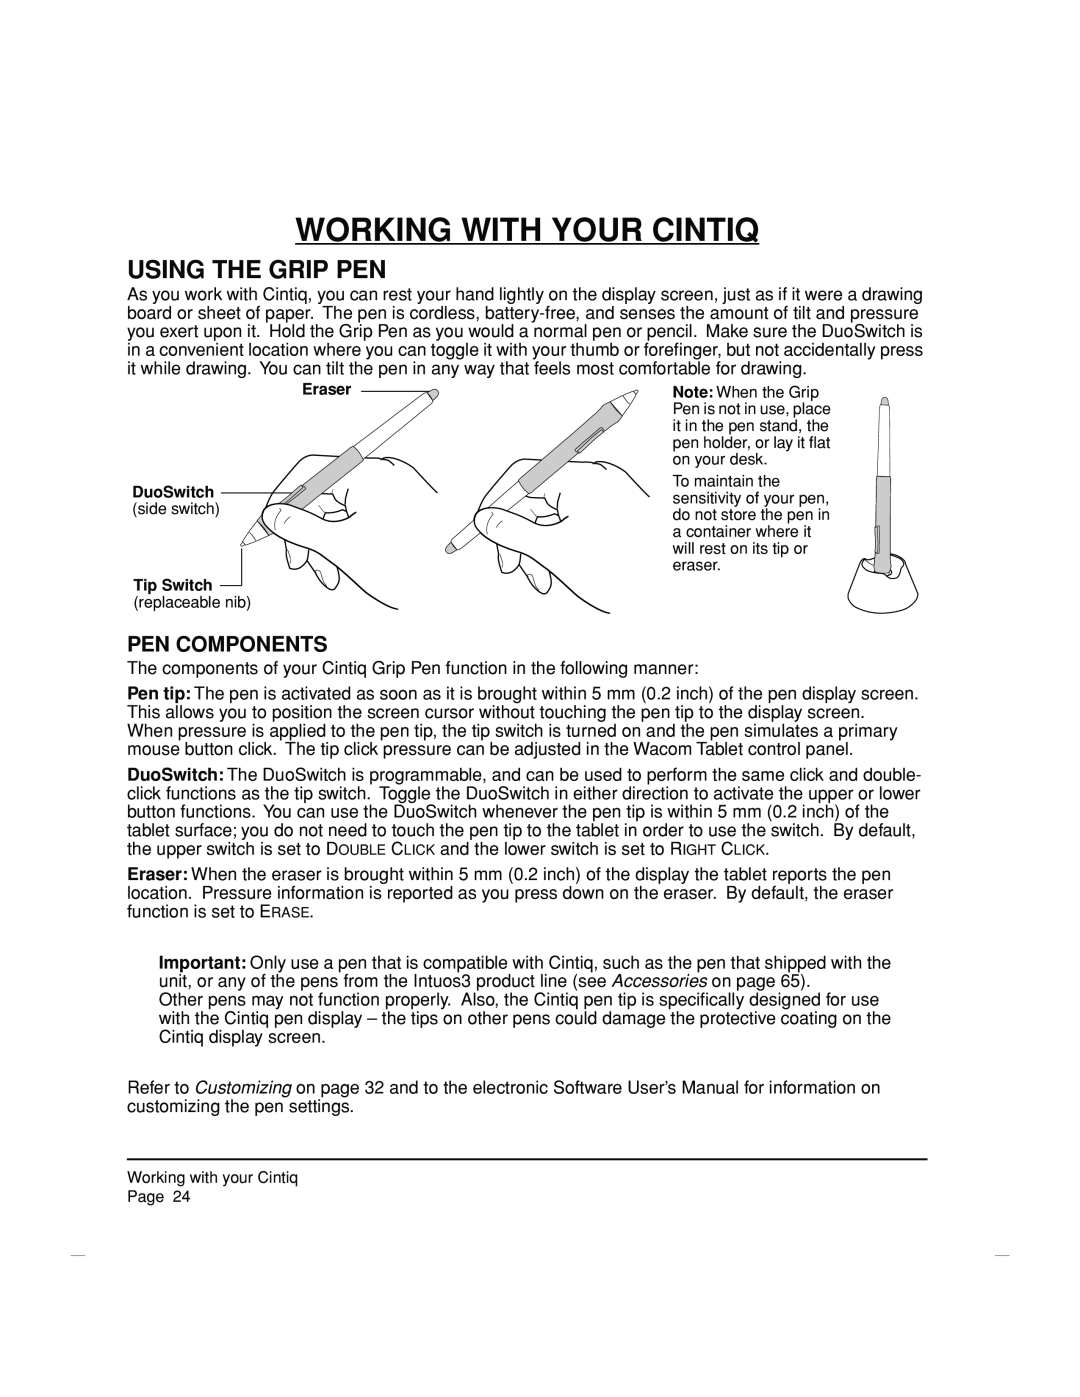 Wacom DTZ-2100D manual Working With Your Cintiq, Using The Grip Pen, Pen Components 